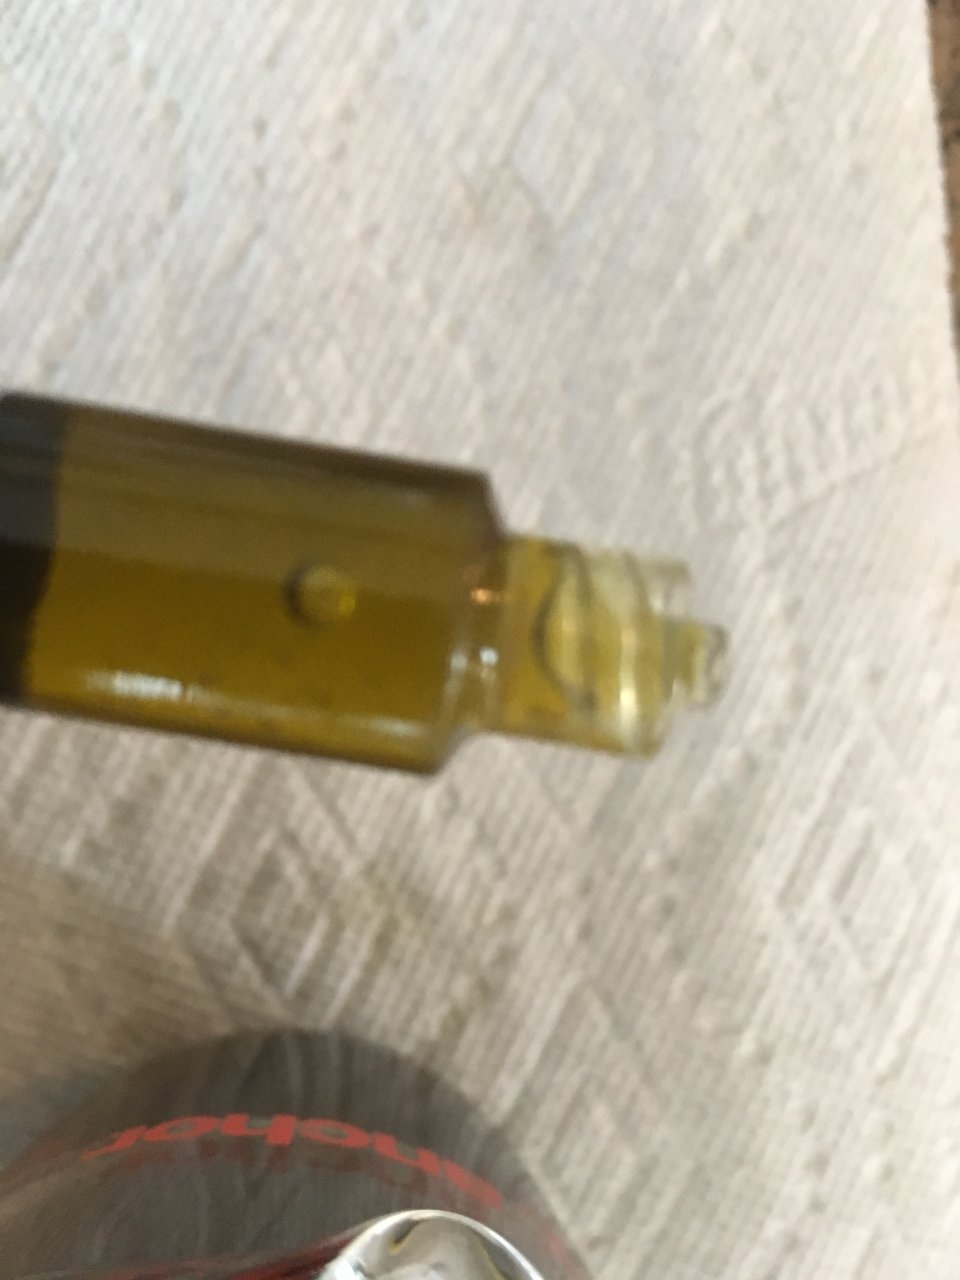 Oil from trimmings colour